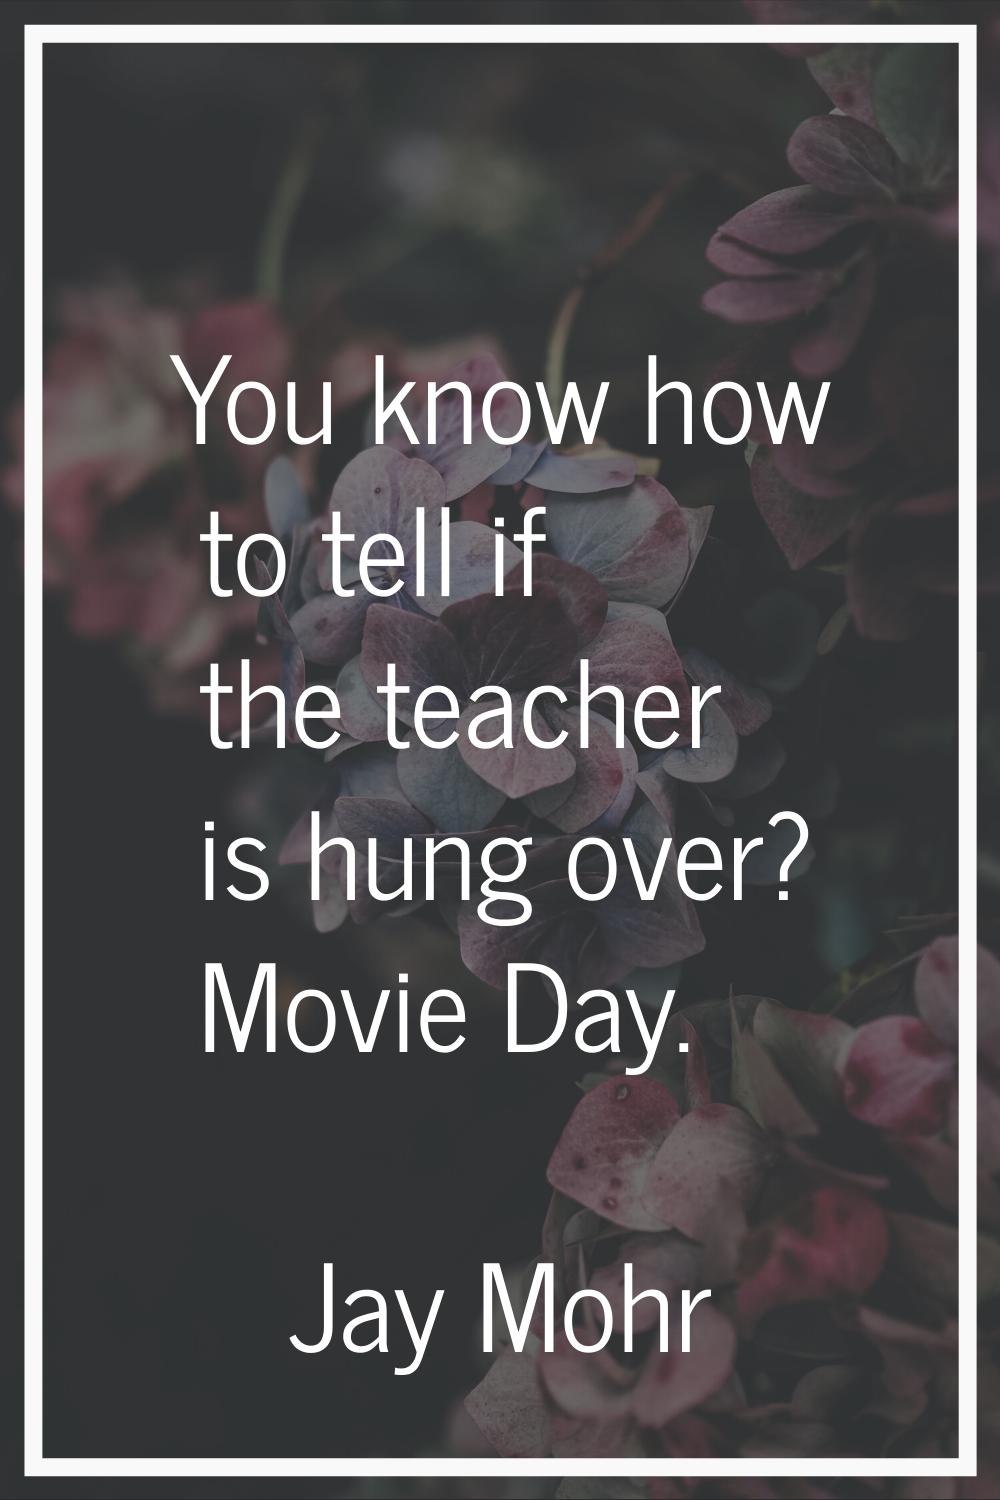 You know how to tell if the teacher is hung over? Movie Day.